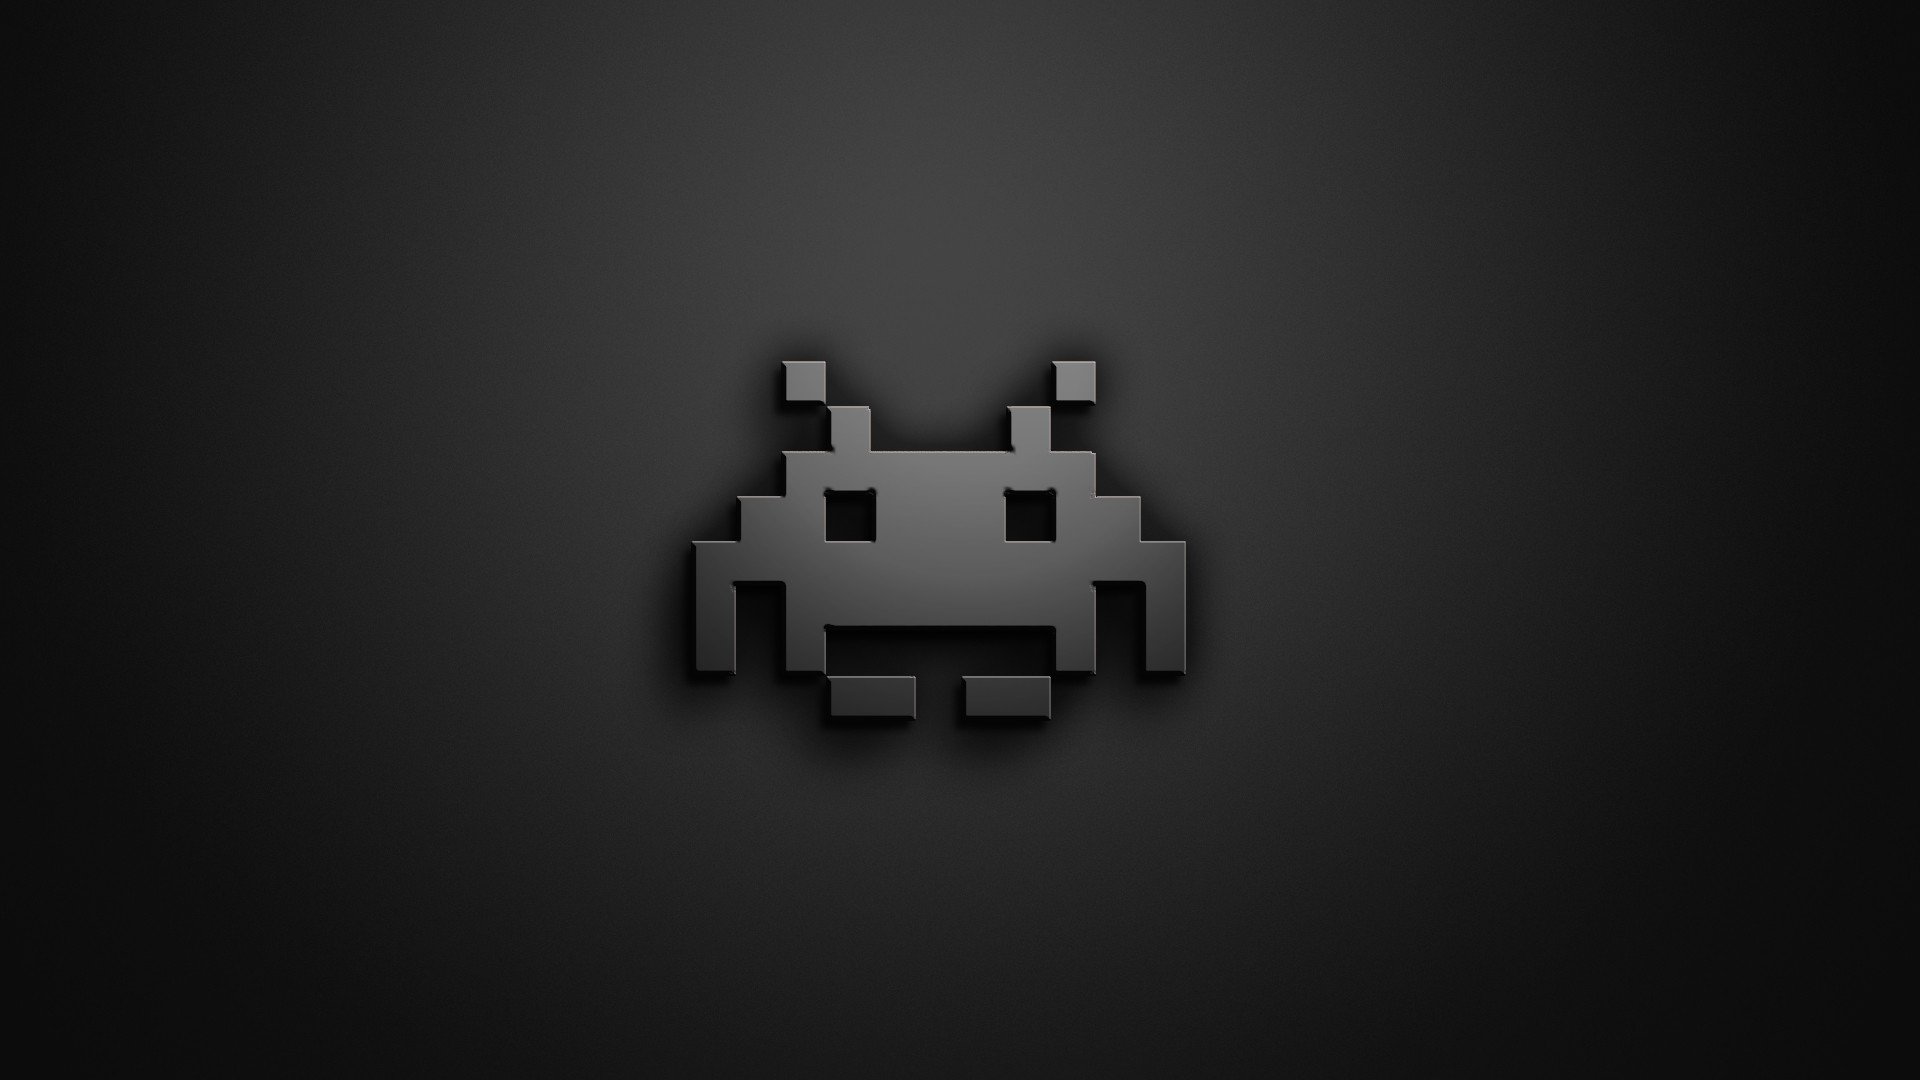 Space Invaders, Retro games, Video games, Monochrome, Simple background ...